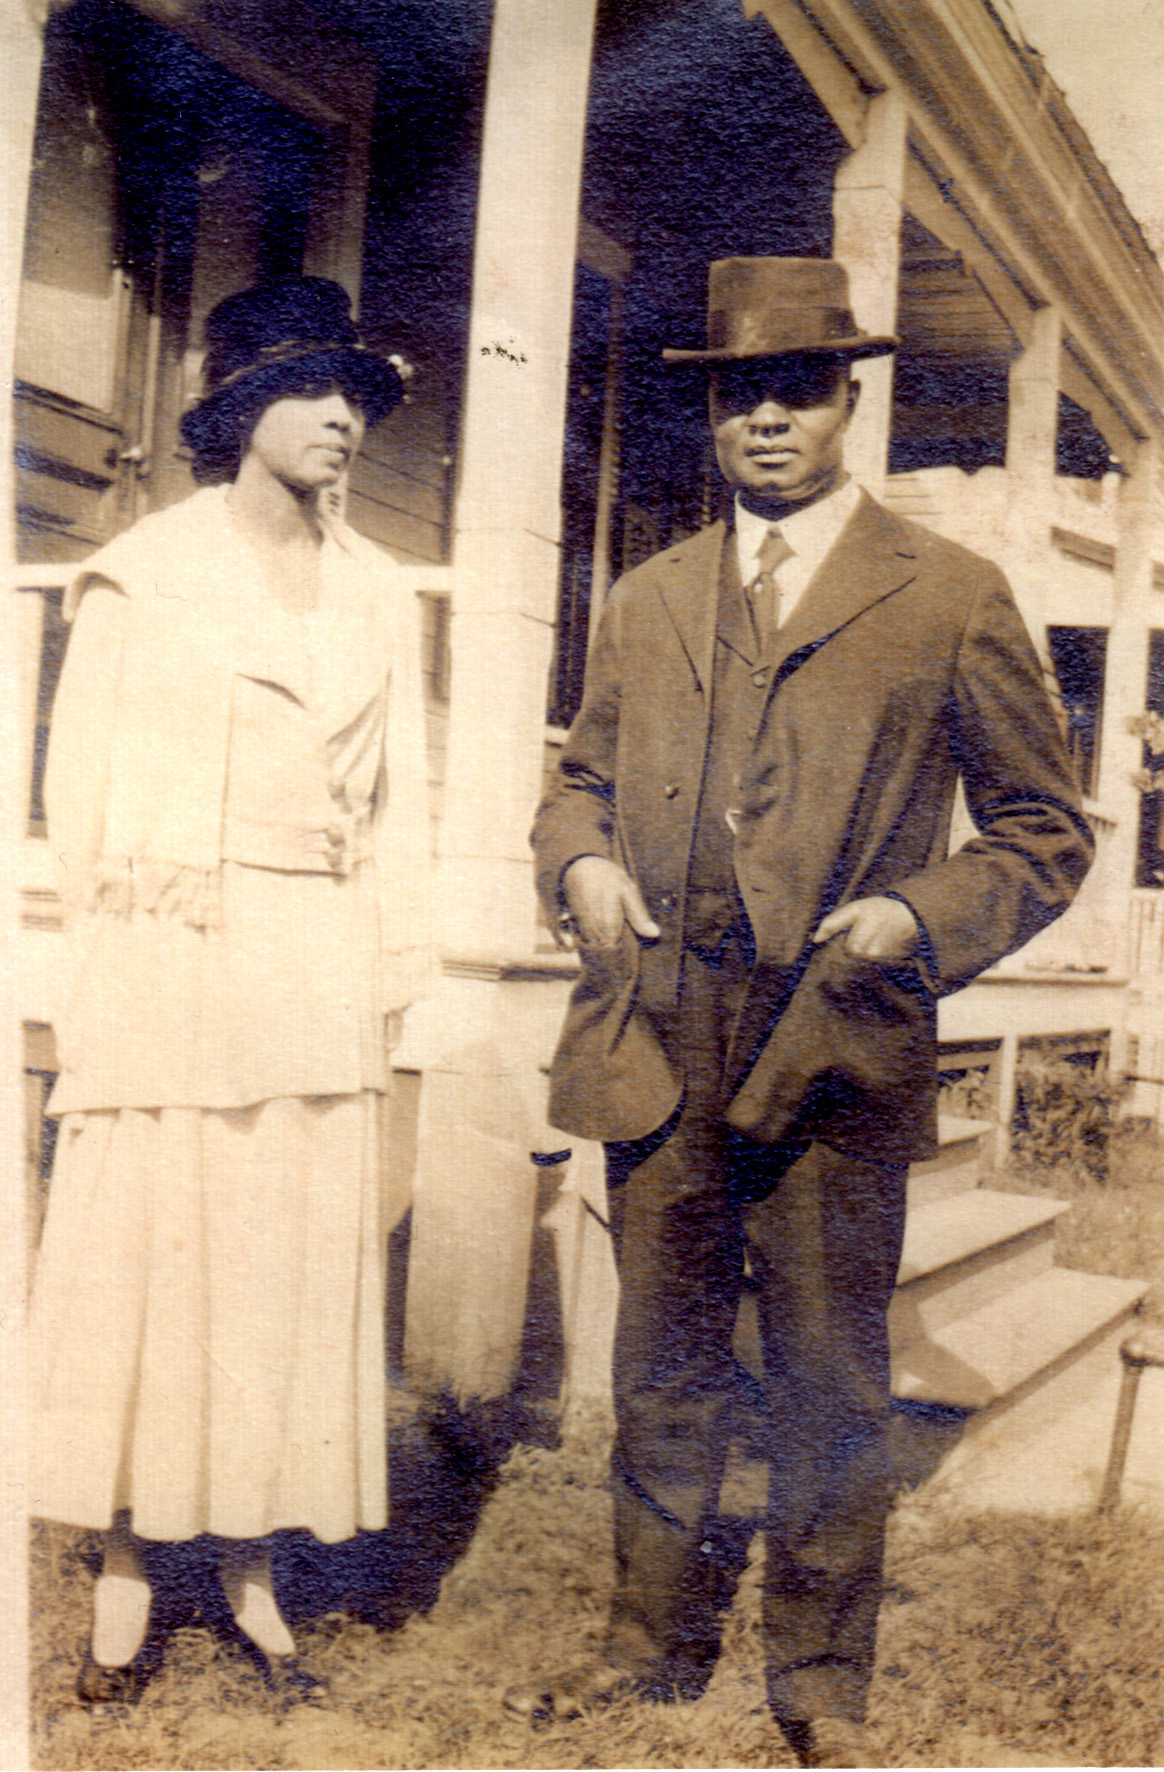 African American couple in the early 1900s